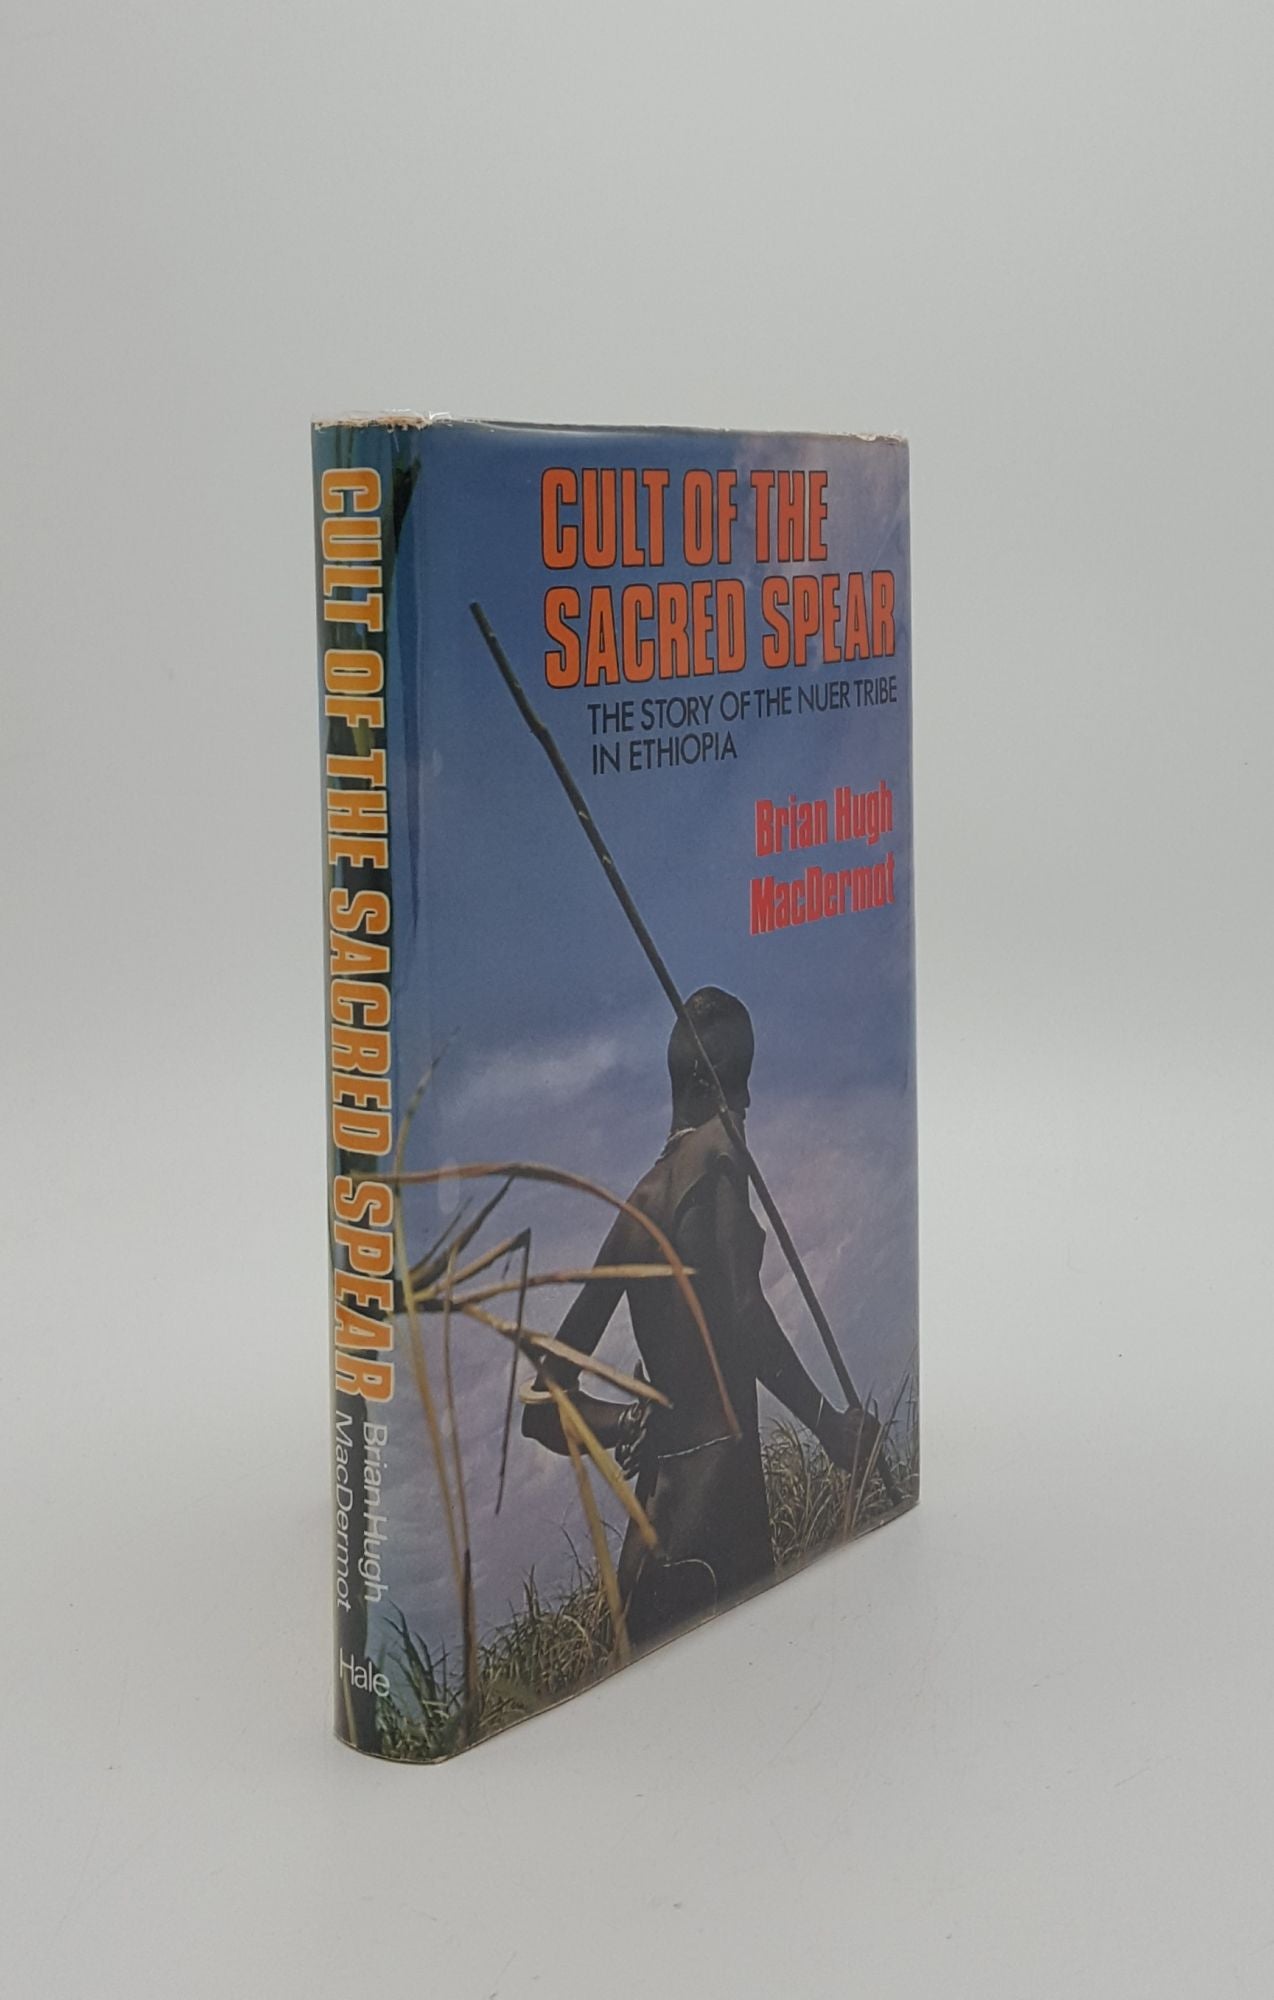 MACDERMOT Brian Hugh - Cult of the Sacred Spear the Story of the Nuer Tribe in Ethiopia